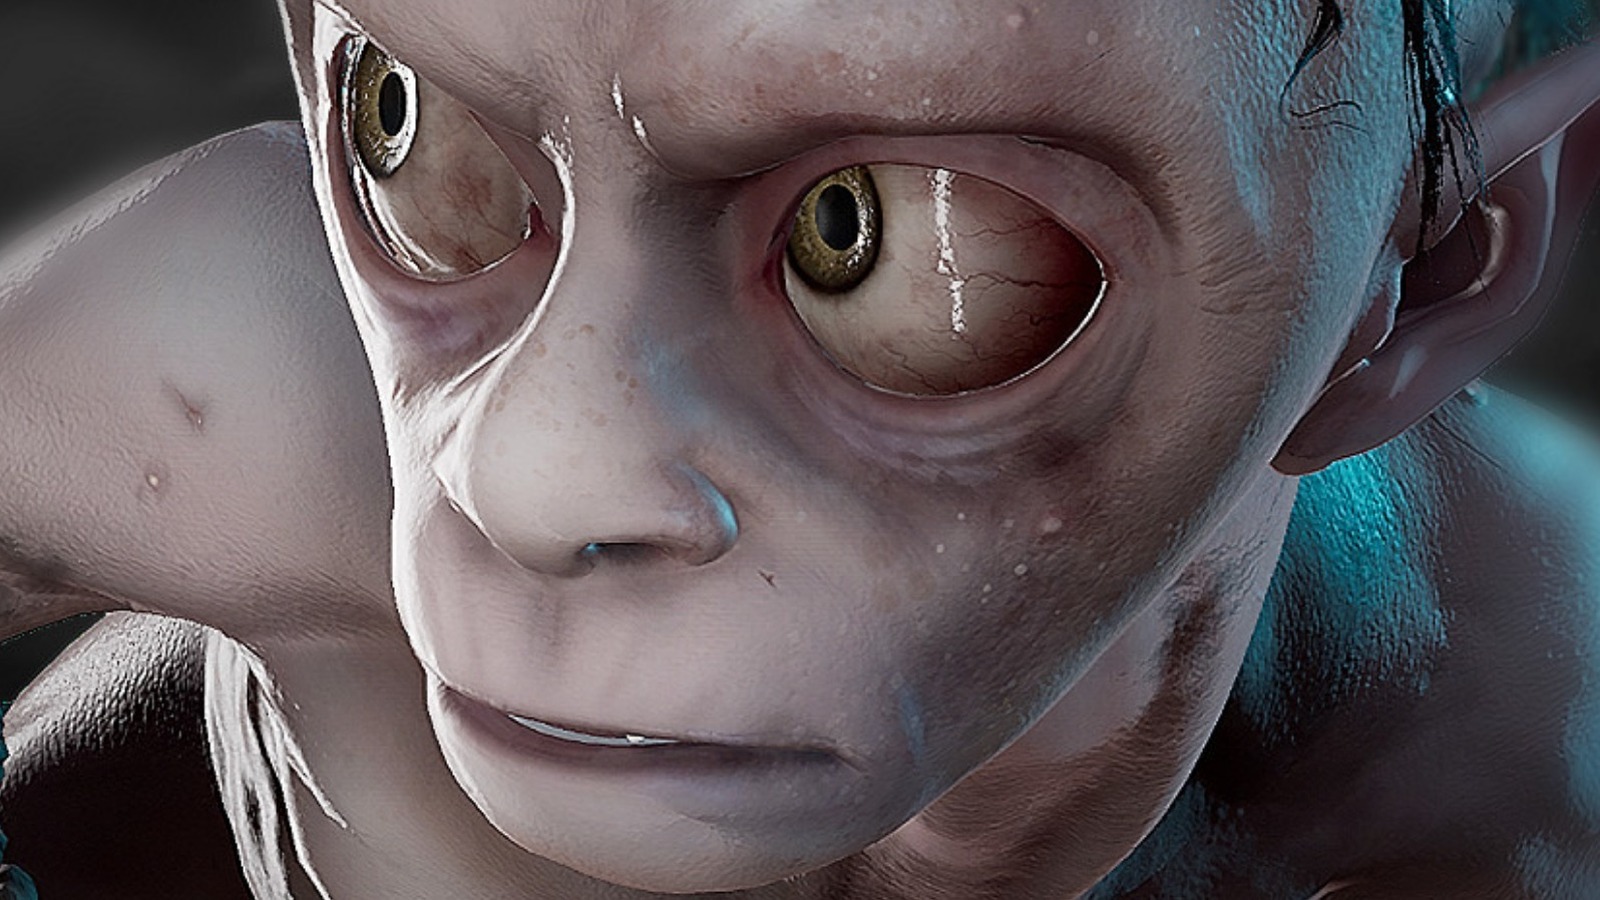 The Lord of the Rings: Gollum is a next-gen stealth action prequel